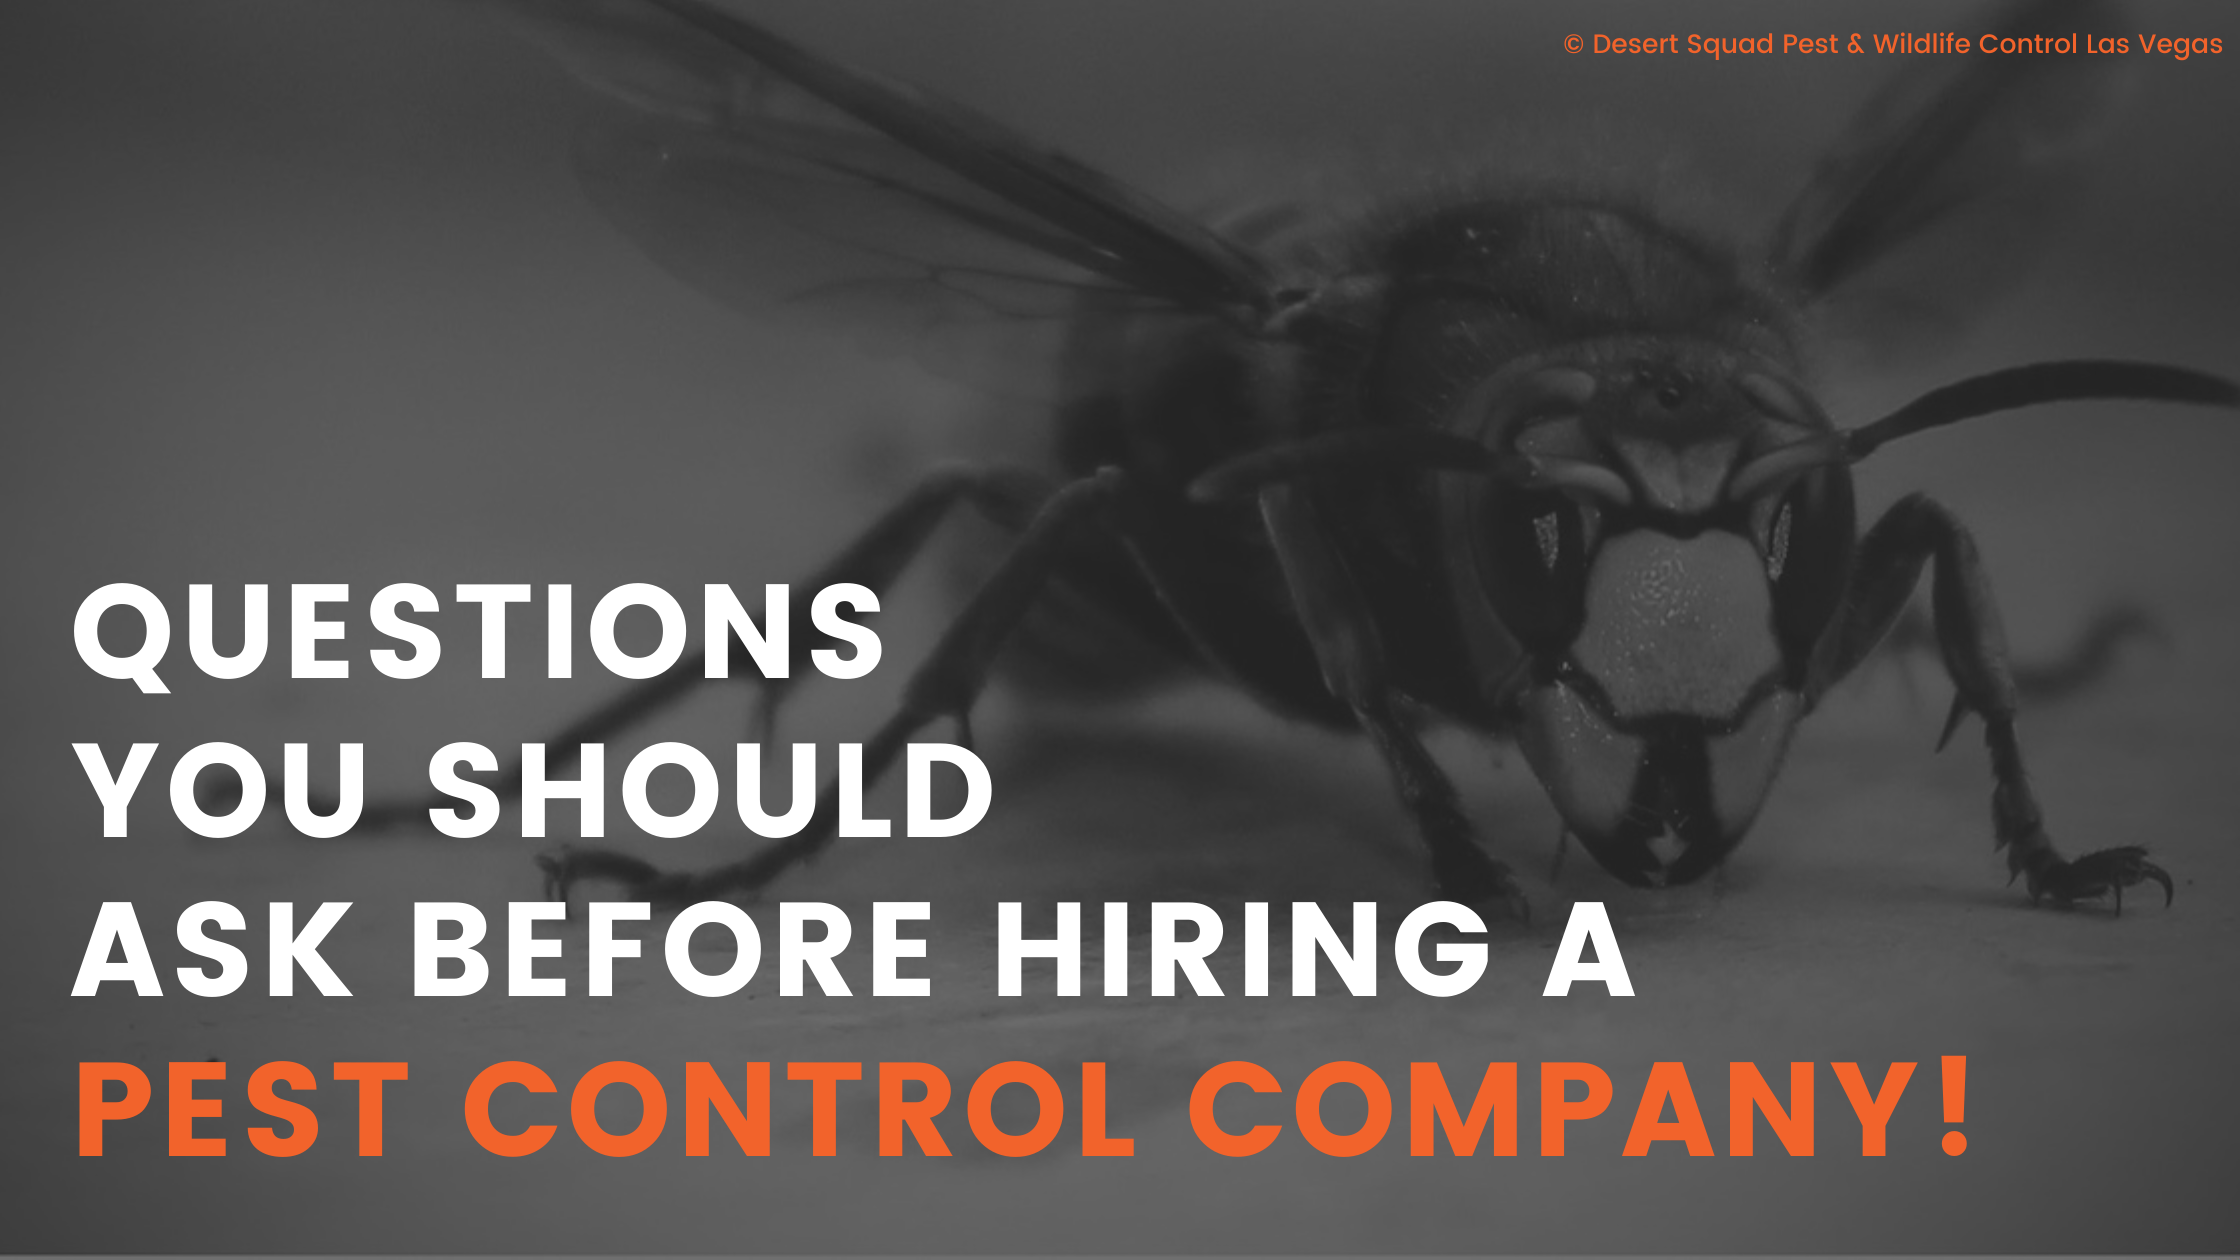 Questions To Ask Before Hiring a Pest Control Company in Las Vegas